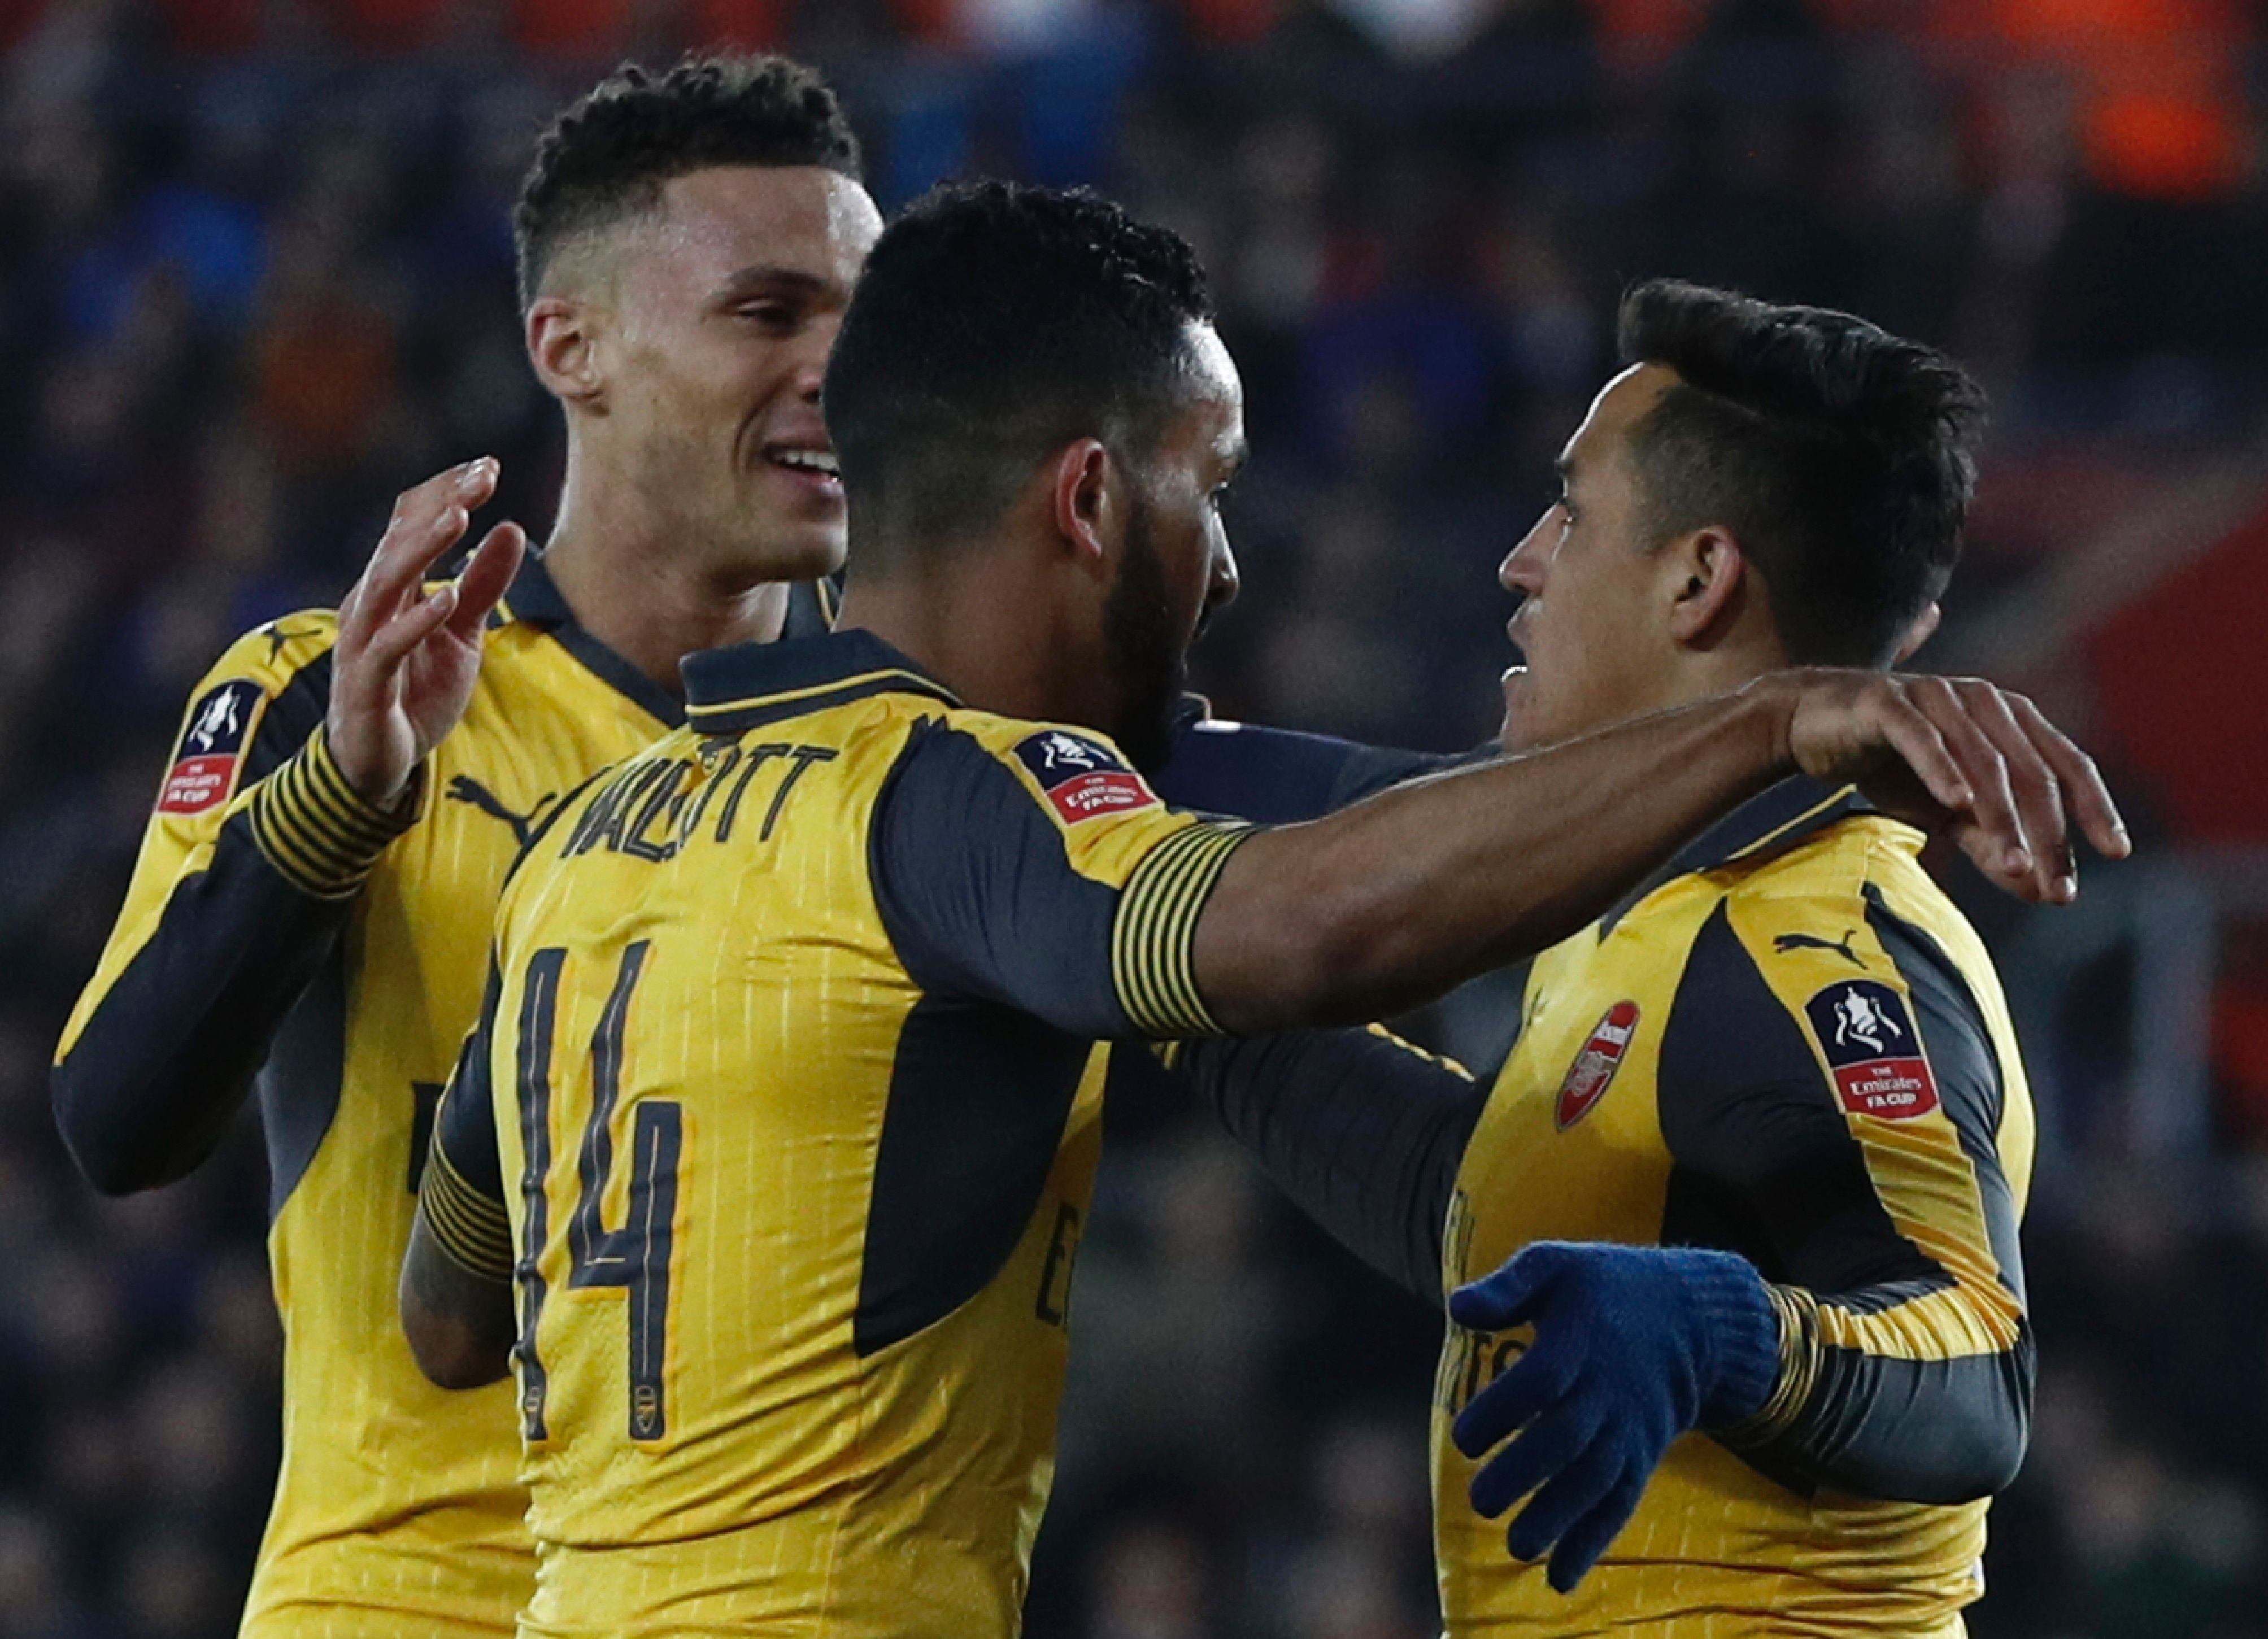 Arsenal's English midfielder Theo Walcott (C) celebrates scoring his team's fourth goal with Arsenal's Chilean striker Alexis Sanchez (R) during the English FA Cup fourth round football match between Southampton and Arsenal at St Mary's in Southampton, southern England on January 28, 2017. / AFP / Adrian DENNIS / RESTRICTED TO EDITORIAL USE. No use with unauthorized audio, video, data, fixture lists, club/league logos or 'live' services. Online in-match use limited to 75 images, no video emulation. No use in betting, games or single club/league/player publications.  /         (Photo credit should read ADRIAN DENNIS/AFP/Getty Images)